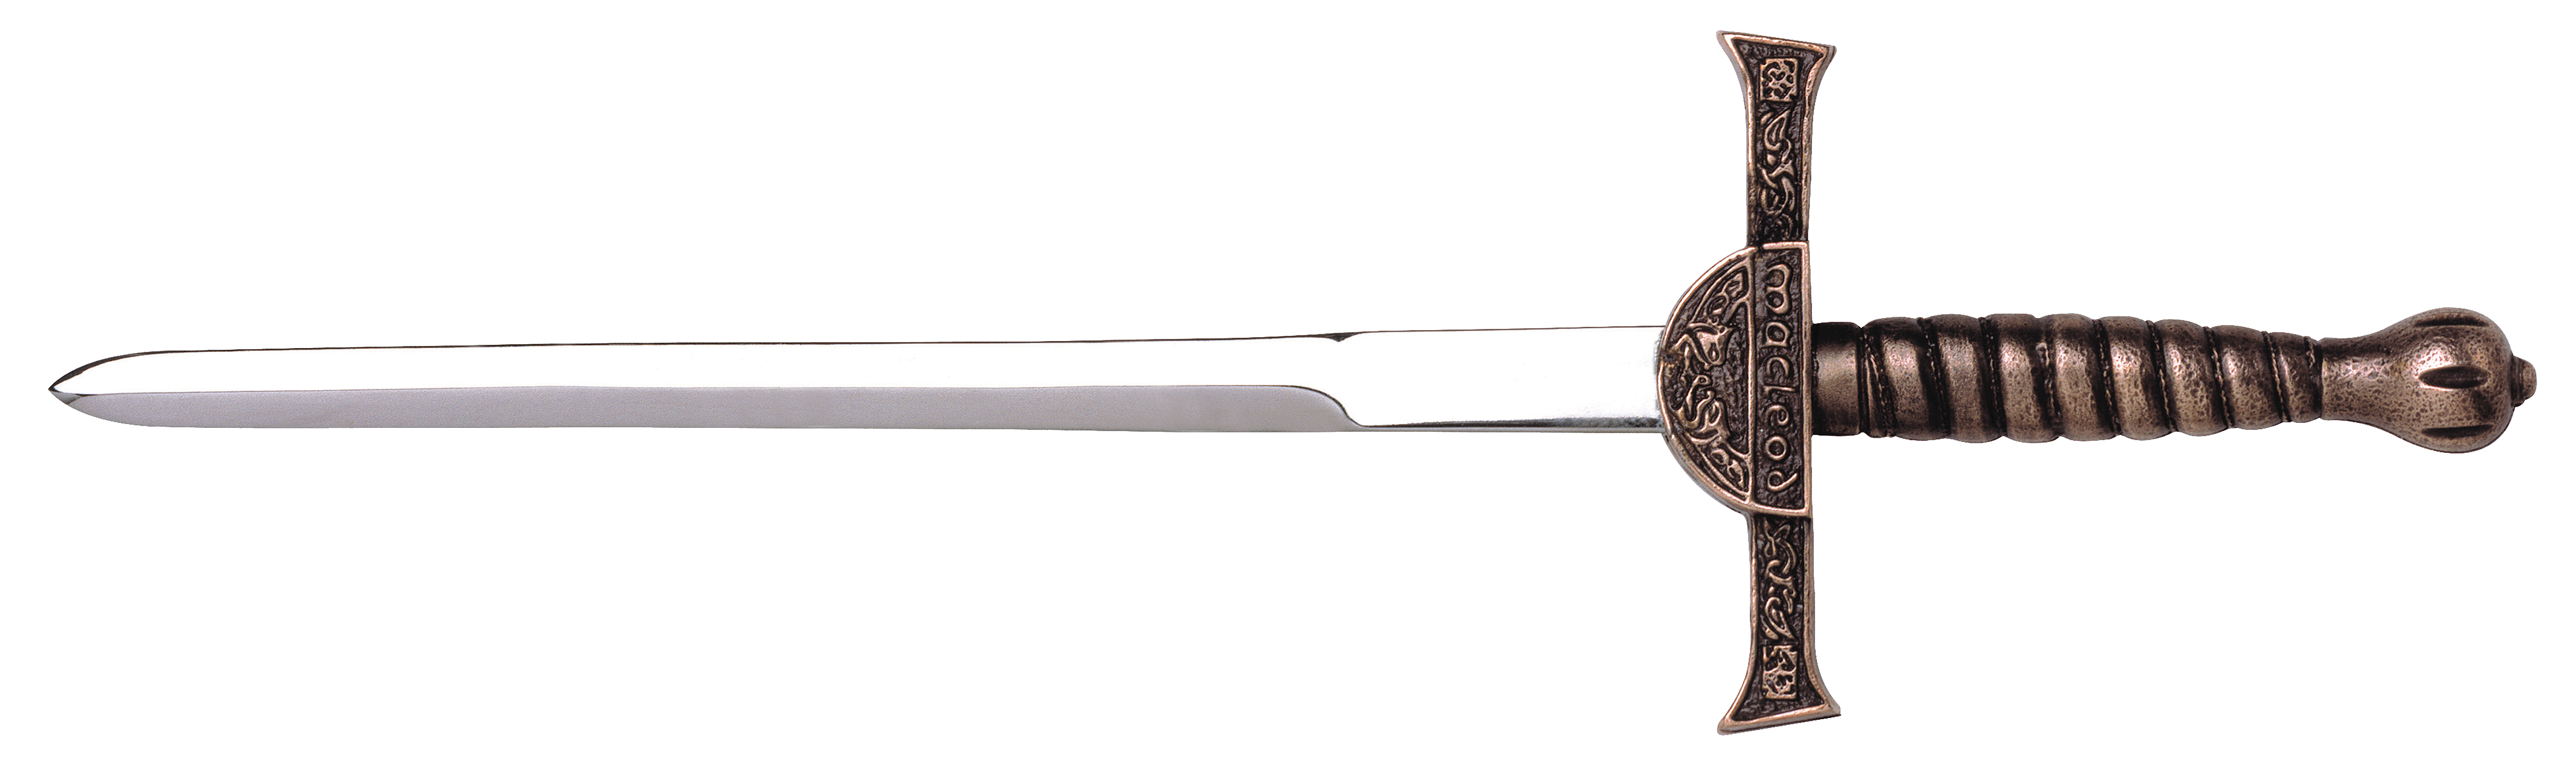 fencing clipart blade